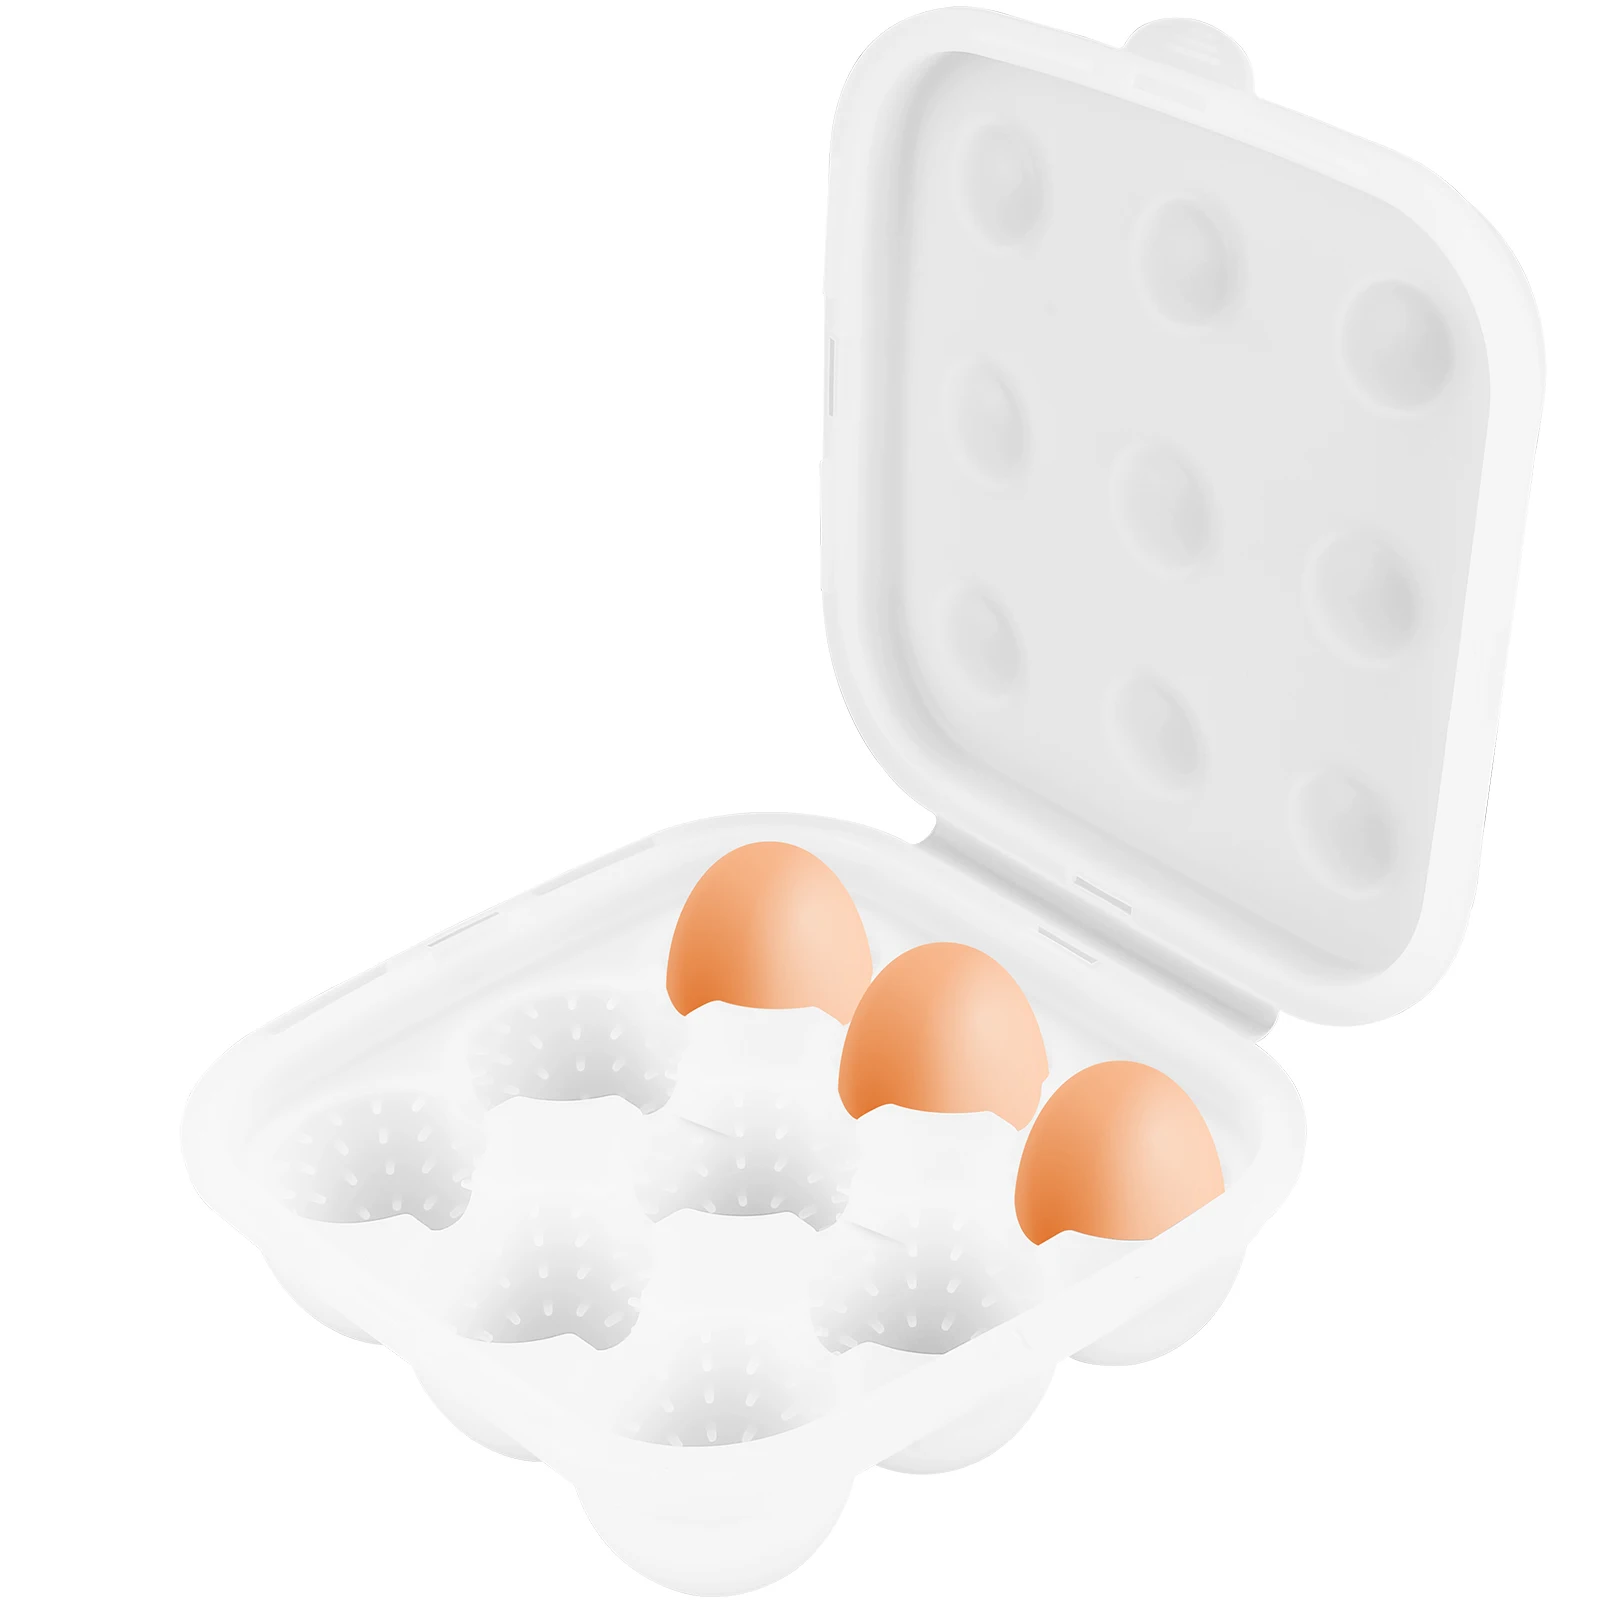 

Egg Holder for Refrigerator Holds 9 Egg Box Silicone Egg Refrigerator Organizer with Lid Flip-Top Egg Tray Container with 9